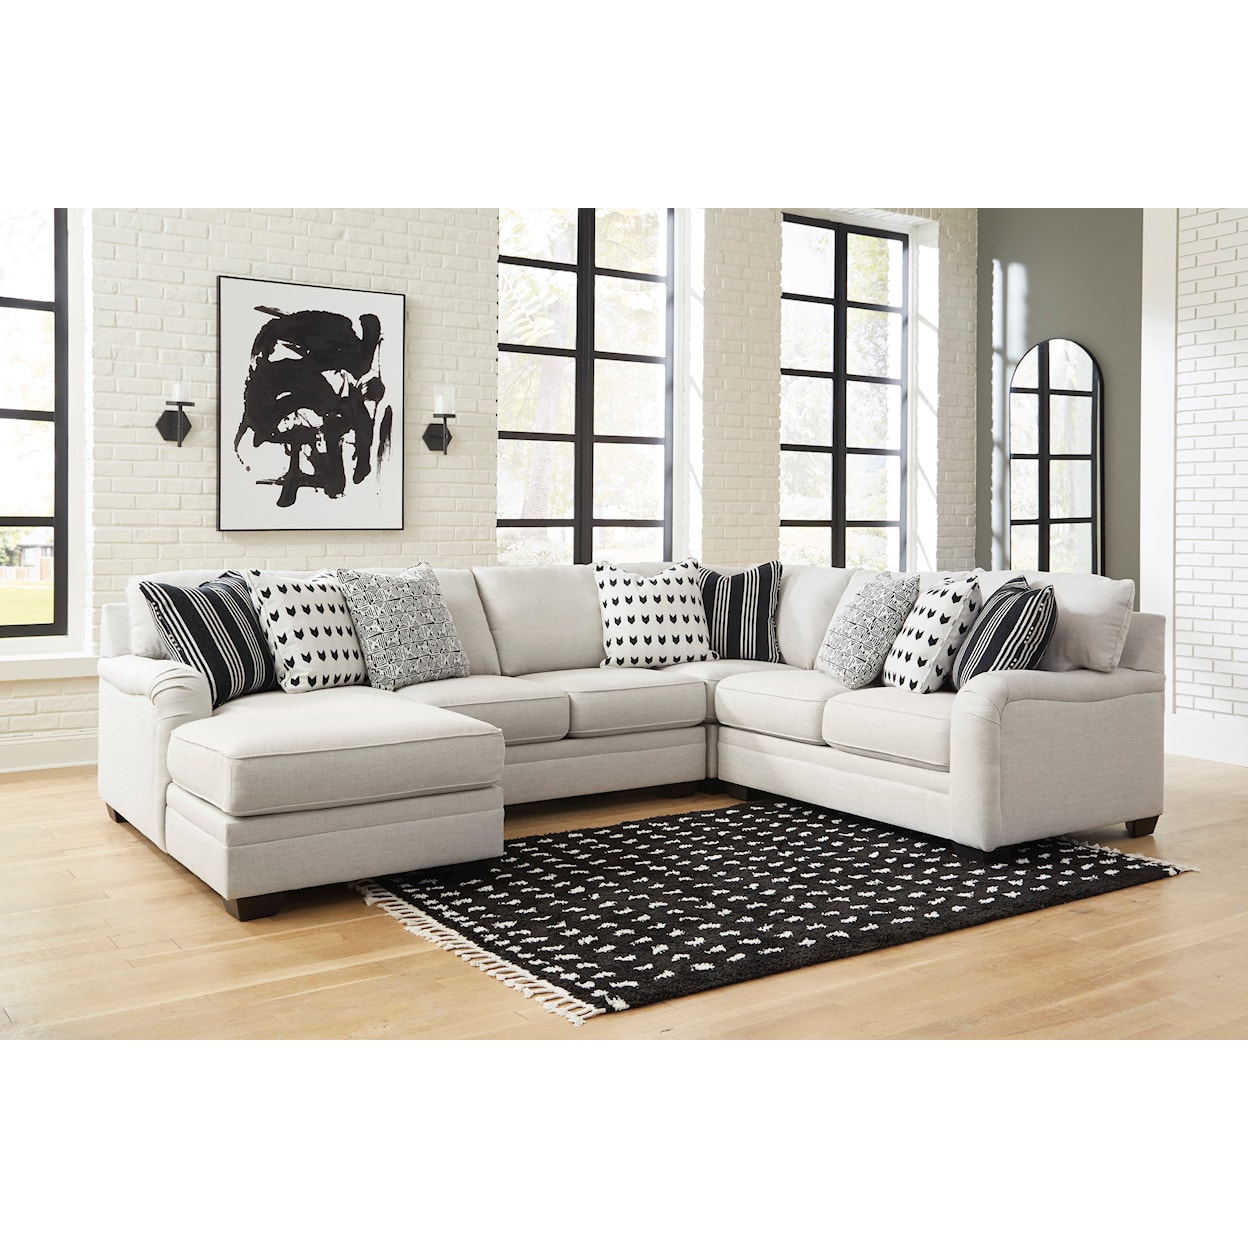 Ashley Furniture Signature Design Huntsworth 4-Piece Sectional with Chaise